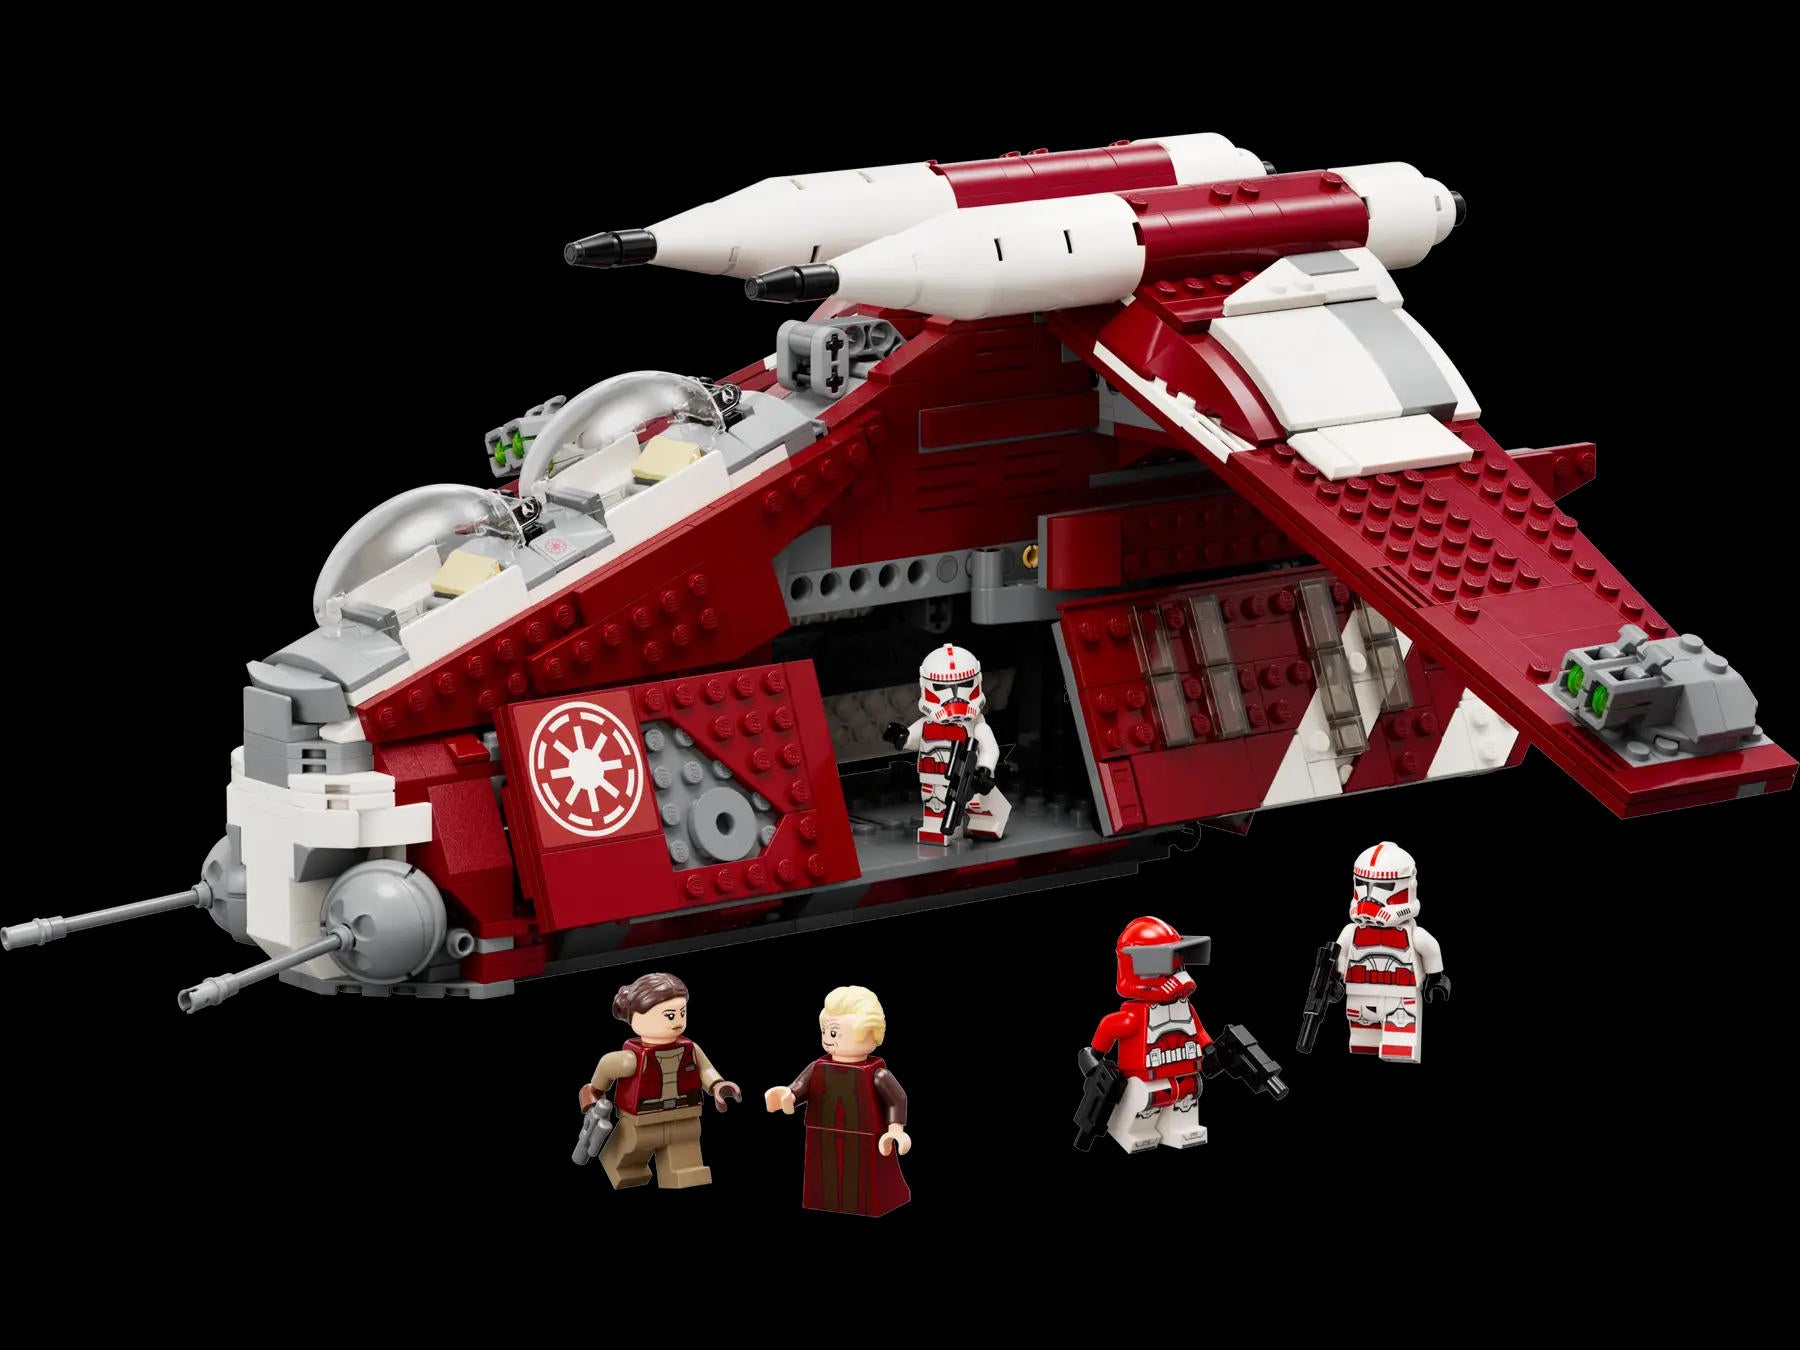 Your Guide To The LEGO Star Wars Sets Launching On September 1st